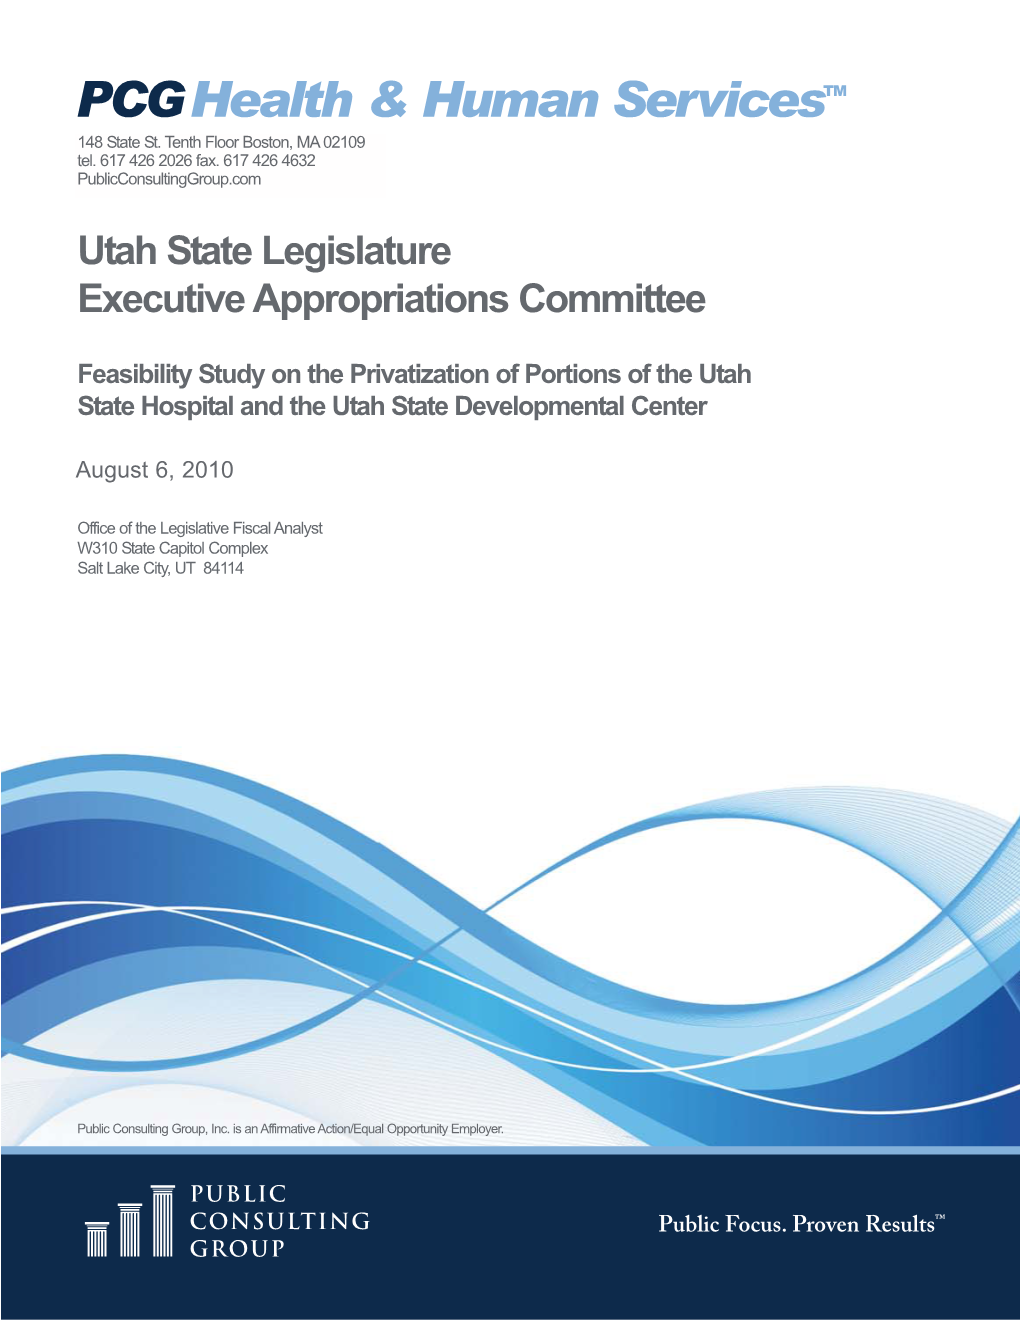 Feasibility Study on the Privatization of Portions of the Utah State Hospital and the Utah State Developmental Center